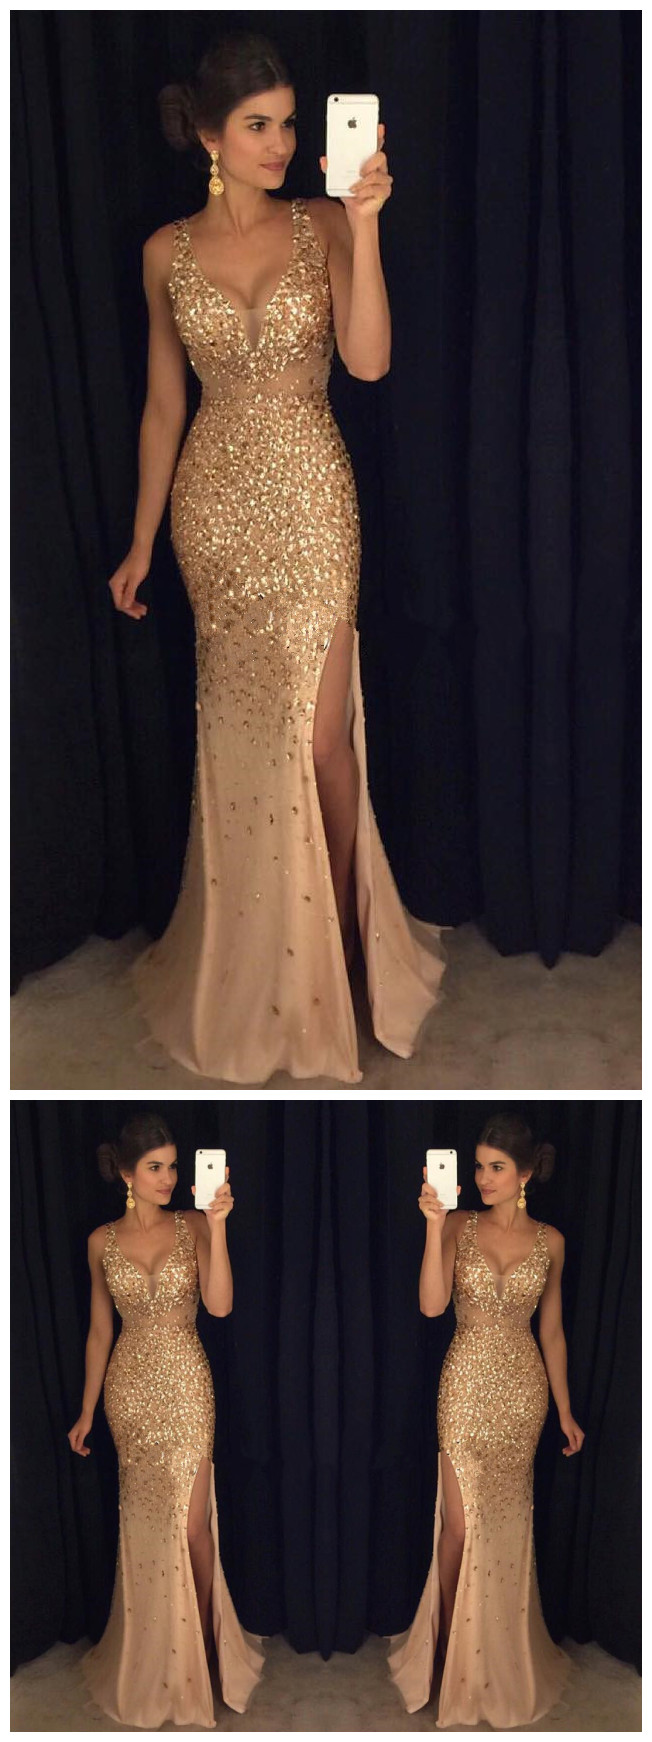 Sexy Spaghetti Straps Sweetheart Long Champagne Crystal Beaded Mermaid Evening Dresses 2017 Long Prom Gowns